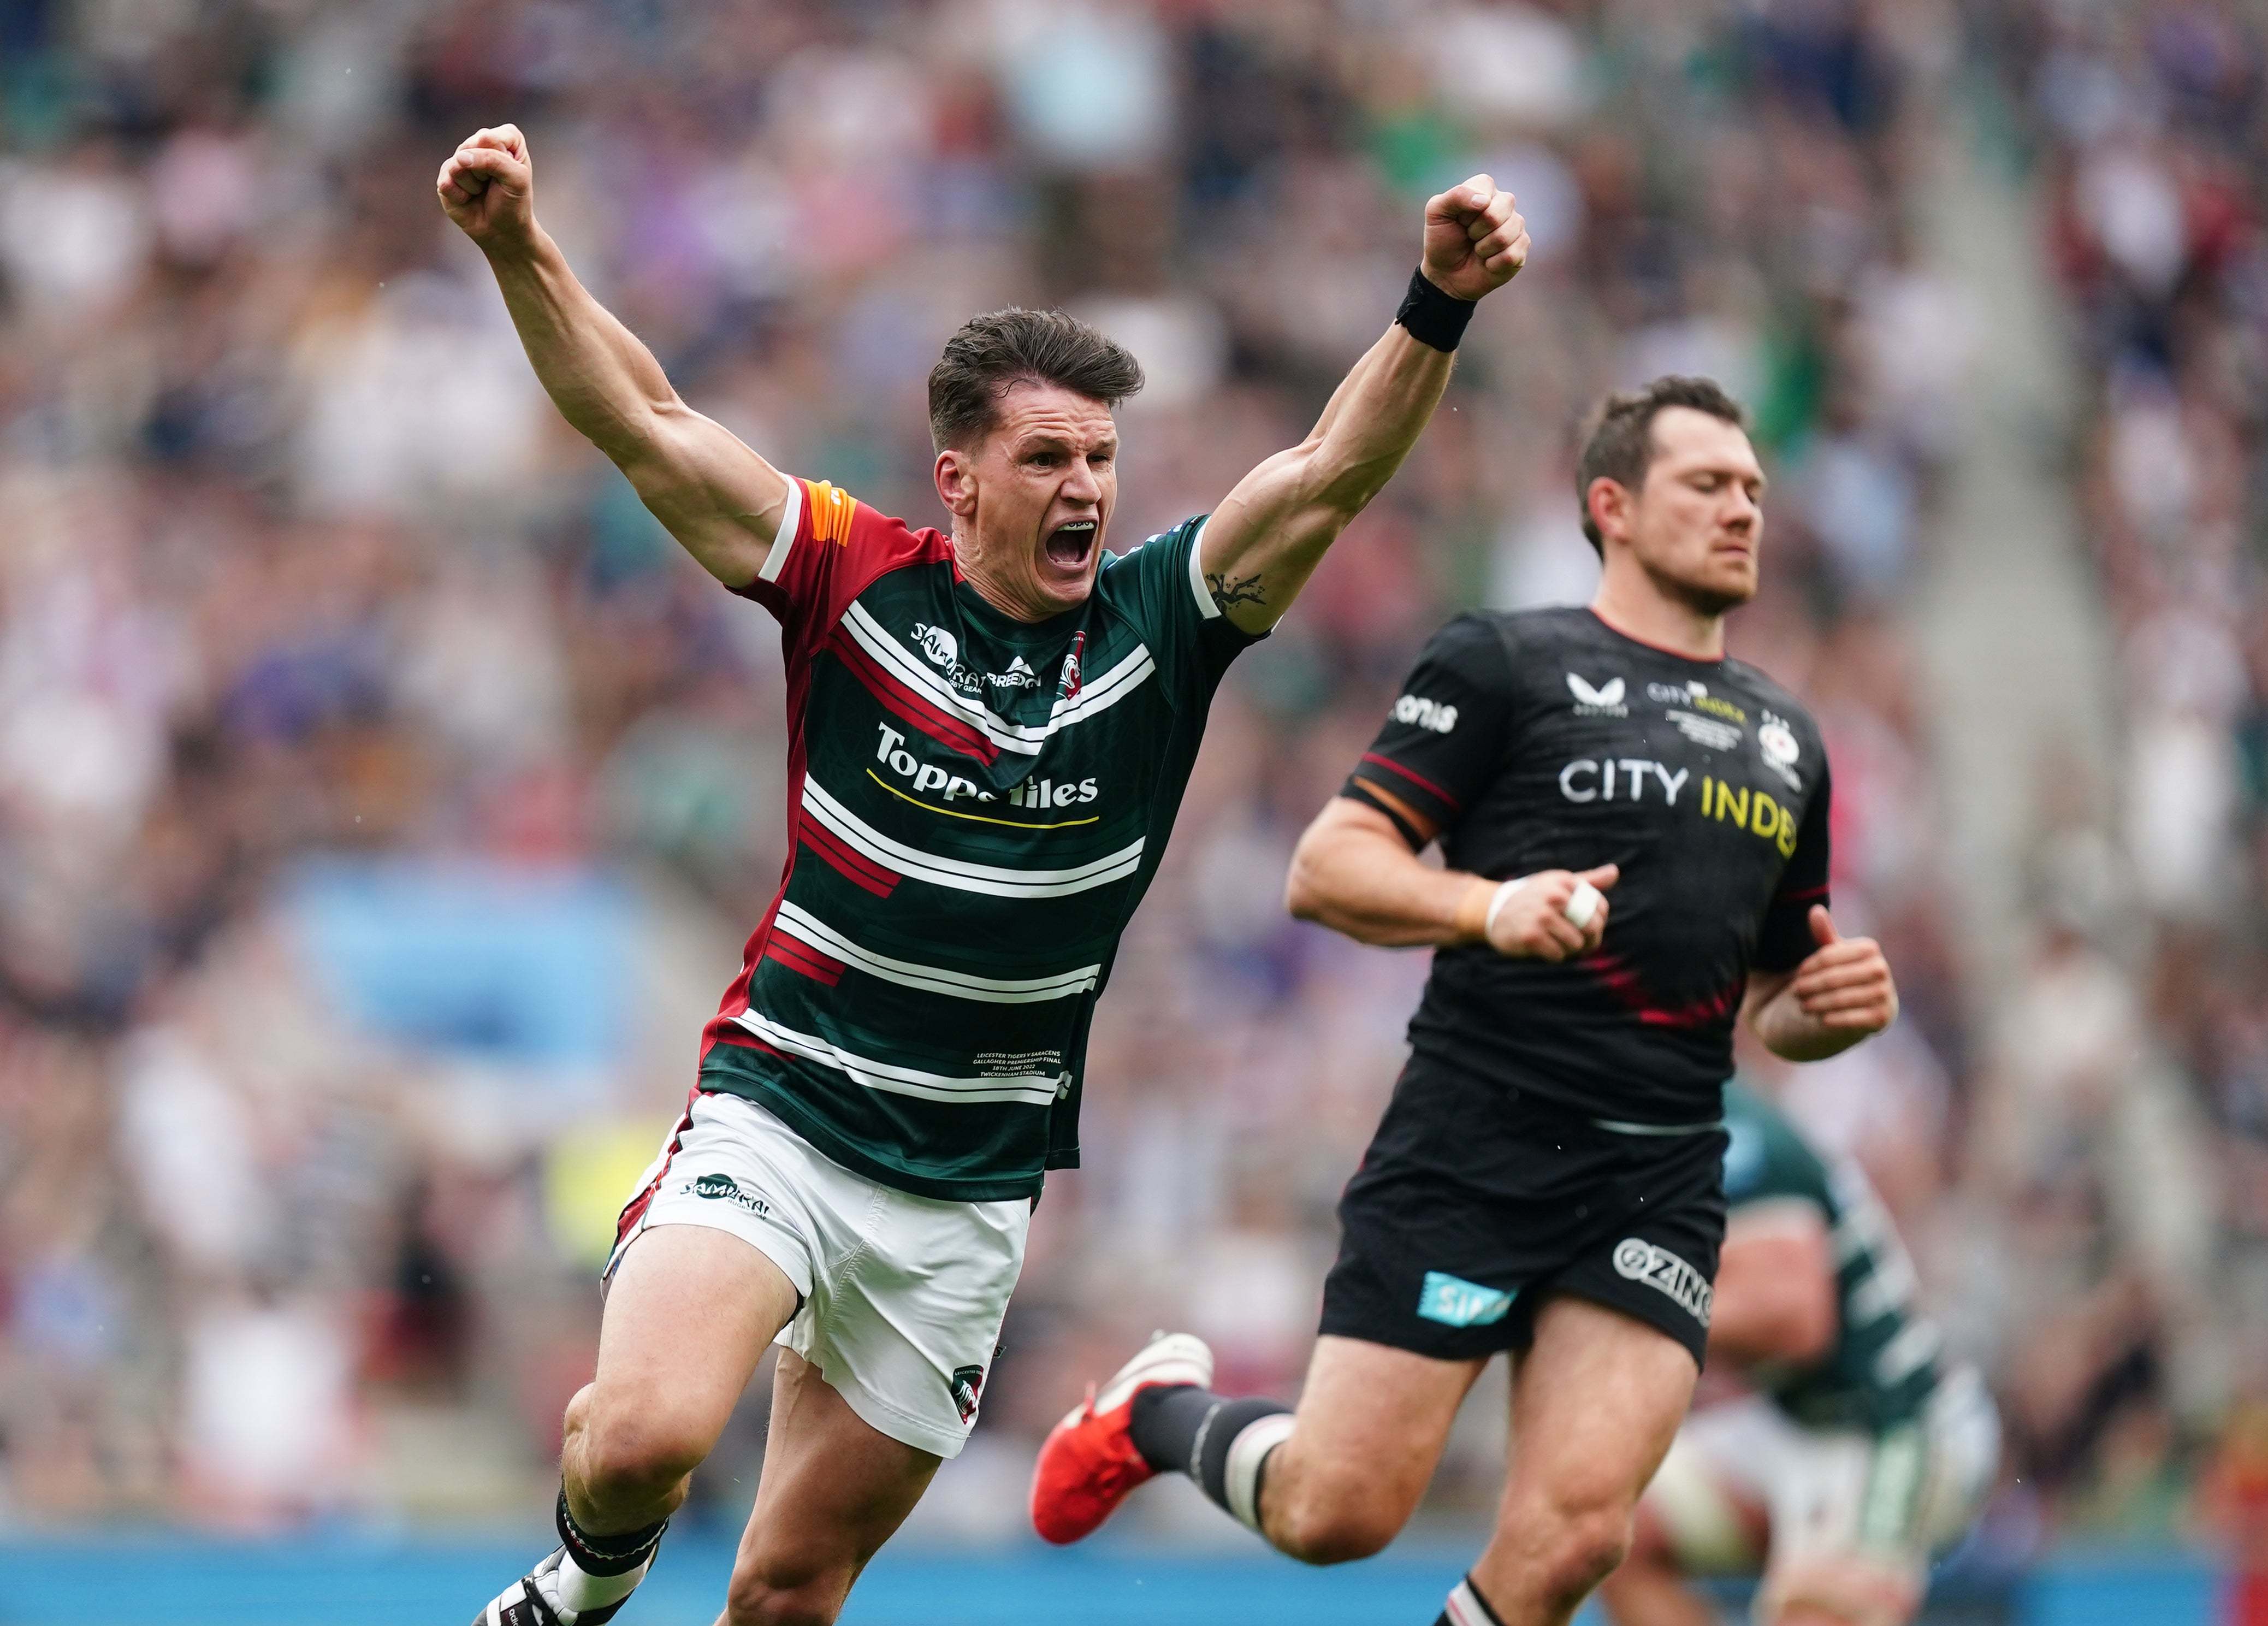 Leicester’s Freddie Burns scored a match-winning drop goal in the Gallagher Premiership final against Saracens (Mike Egerton/PA)